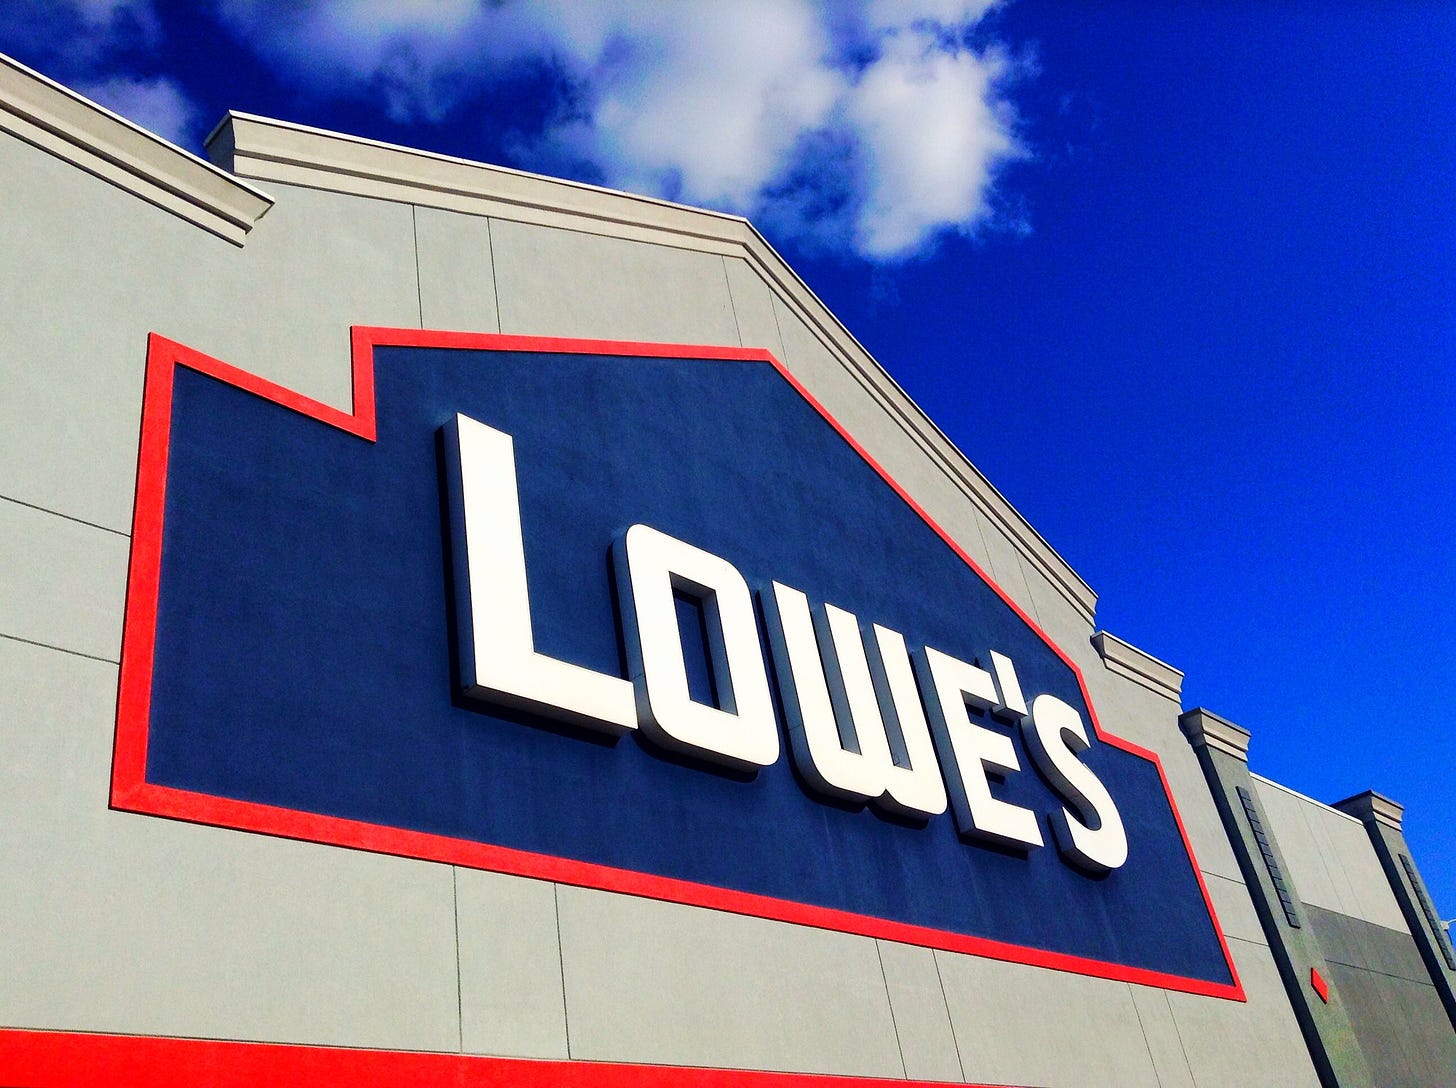 Lowe's sign